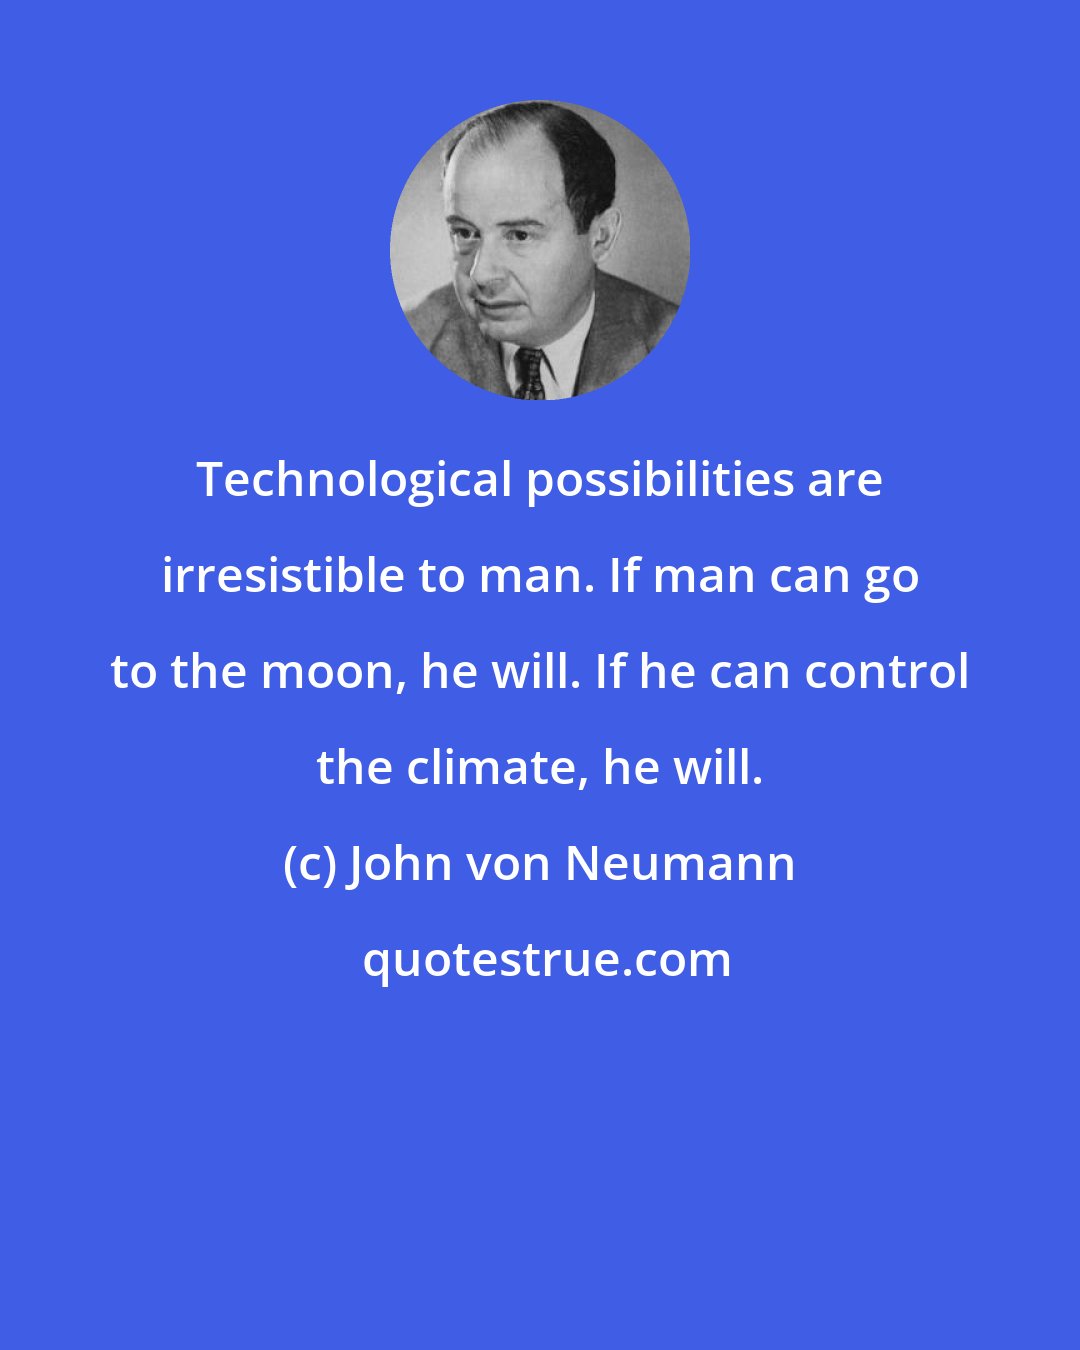 John von Neumann: Technological possibilities are irresistible to man. If man can go to the moon, he will. If he can control the climate, he will.